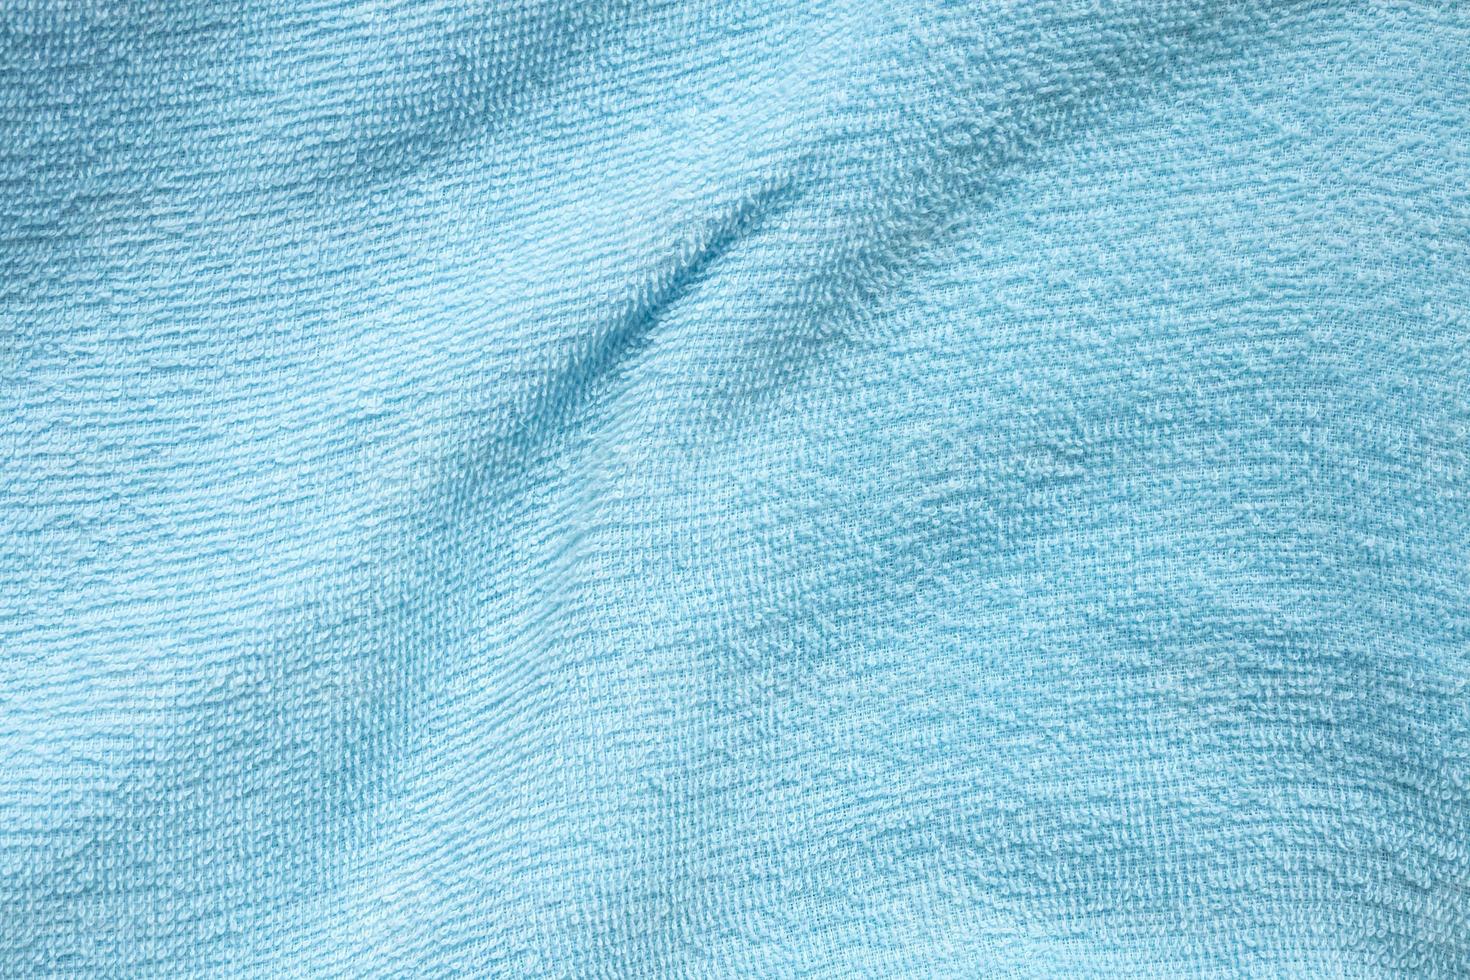 Blue cotton fabric towel texture abstract background photo